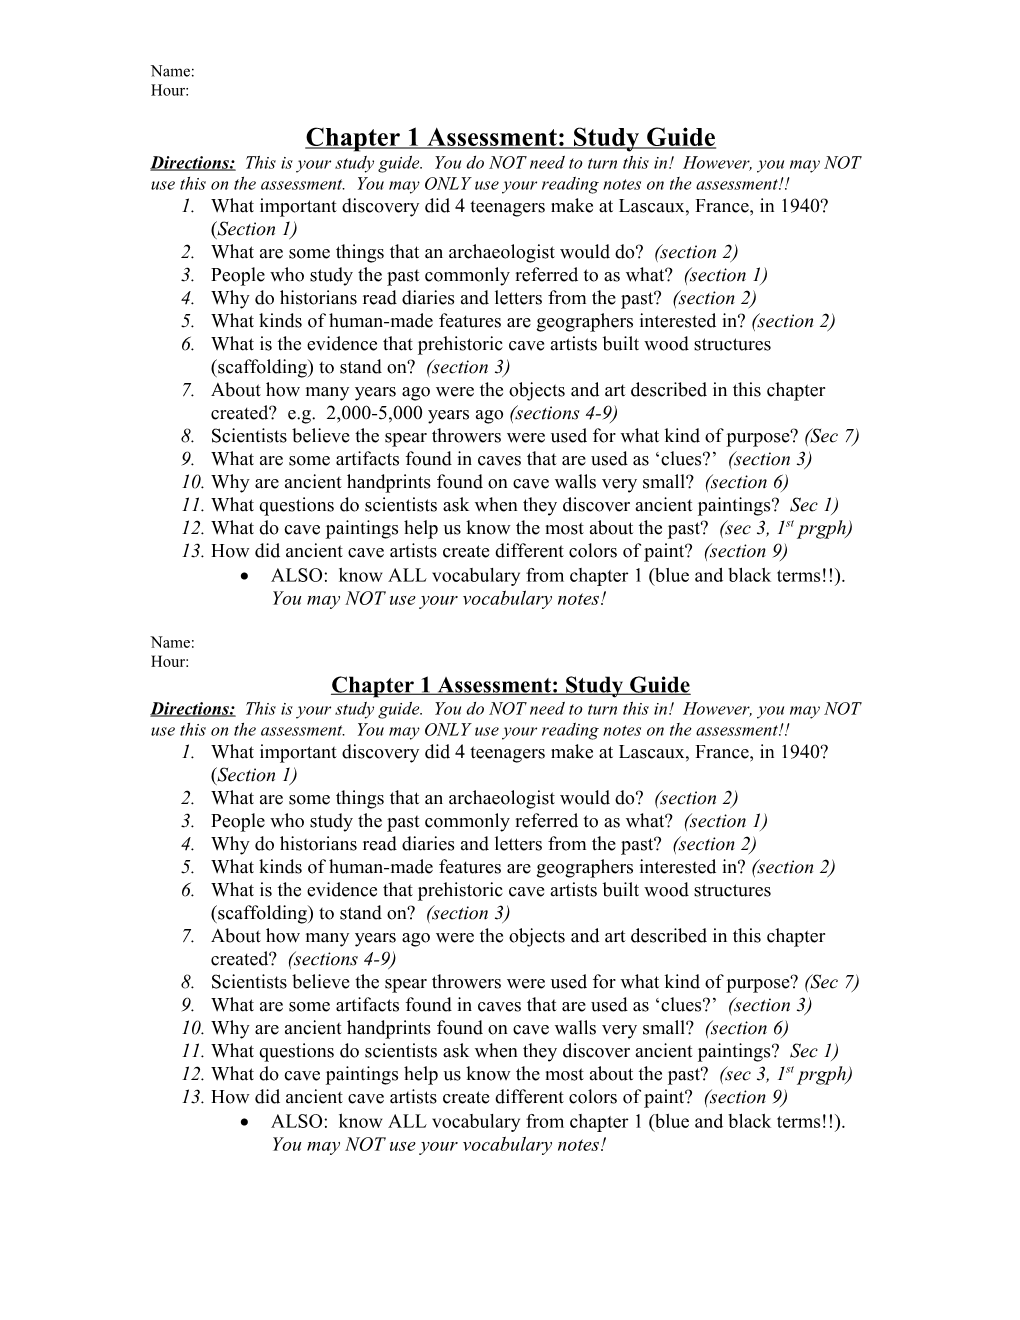 Chapter 1 Assessment: Study Guide